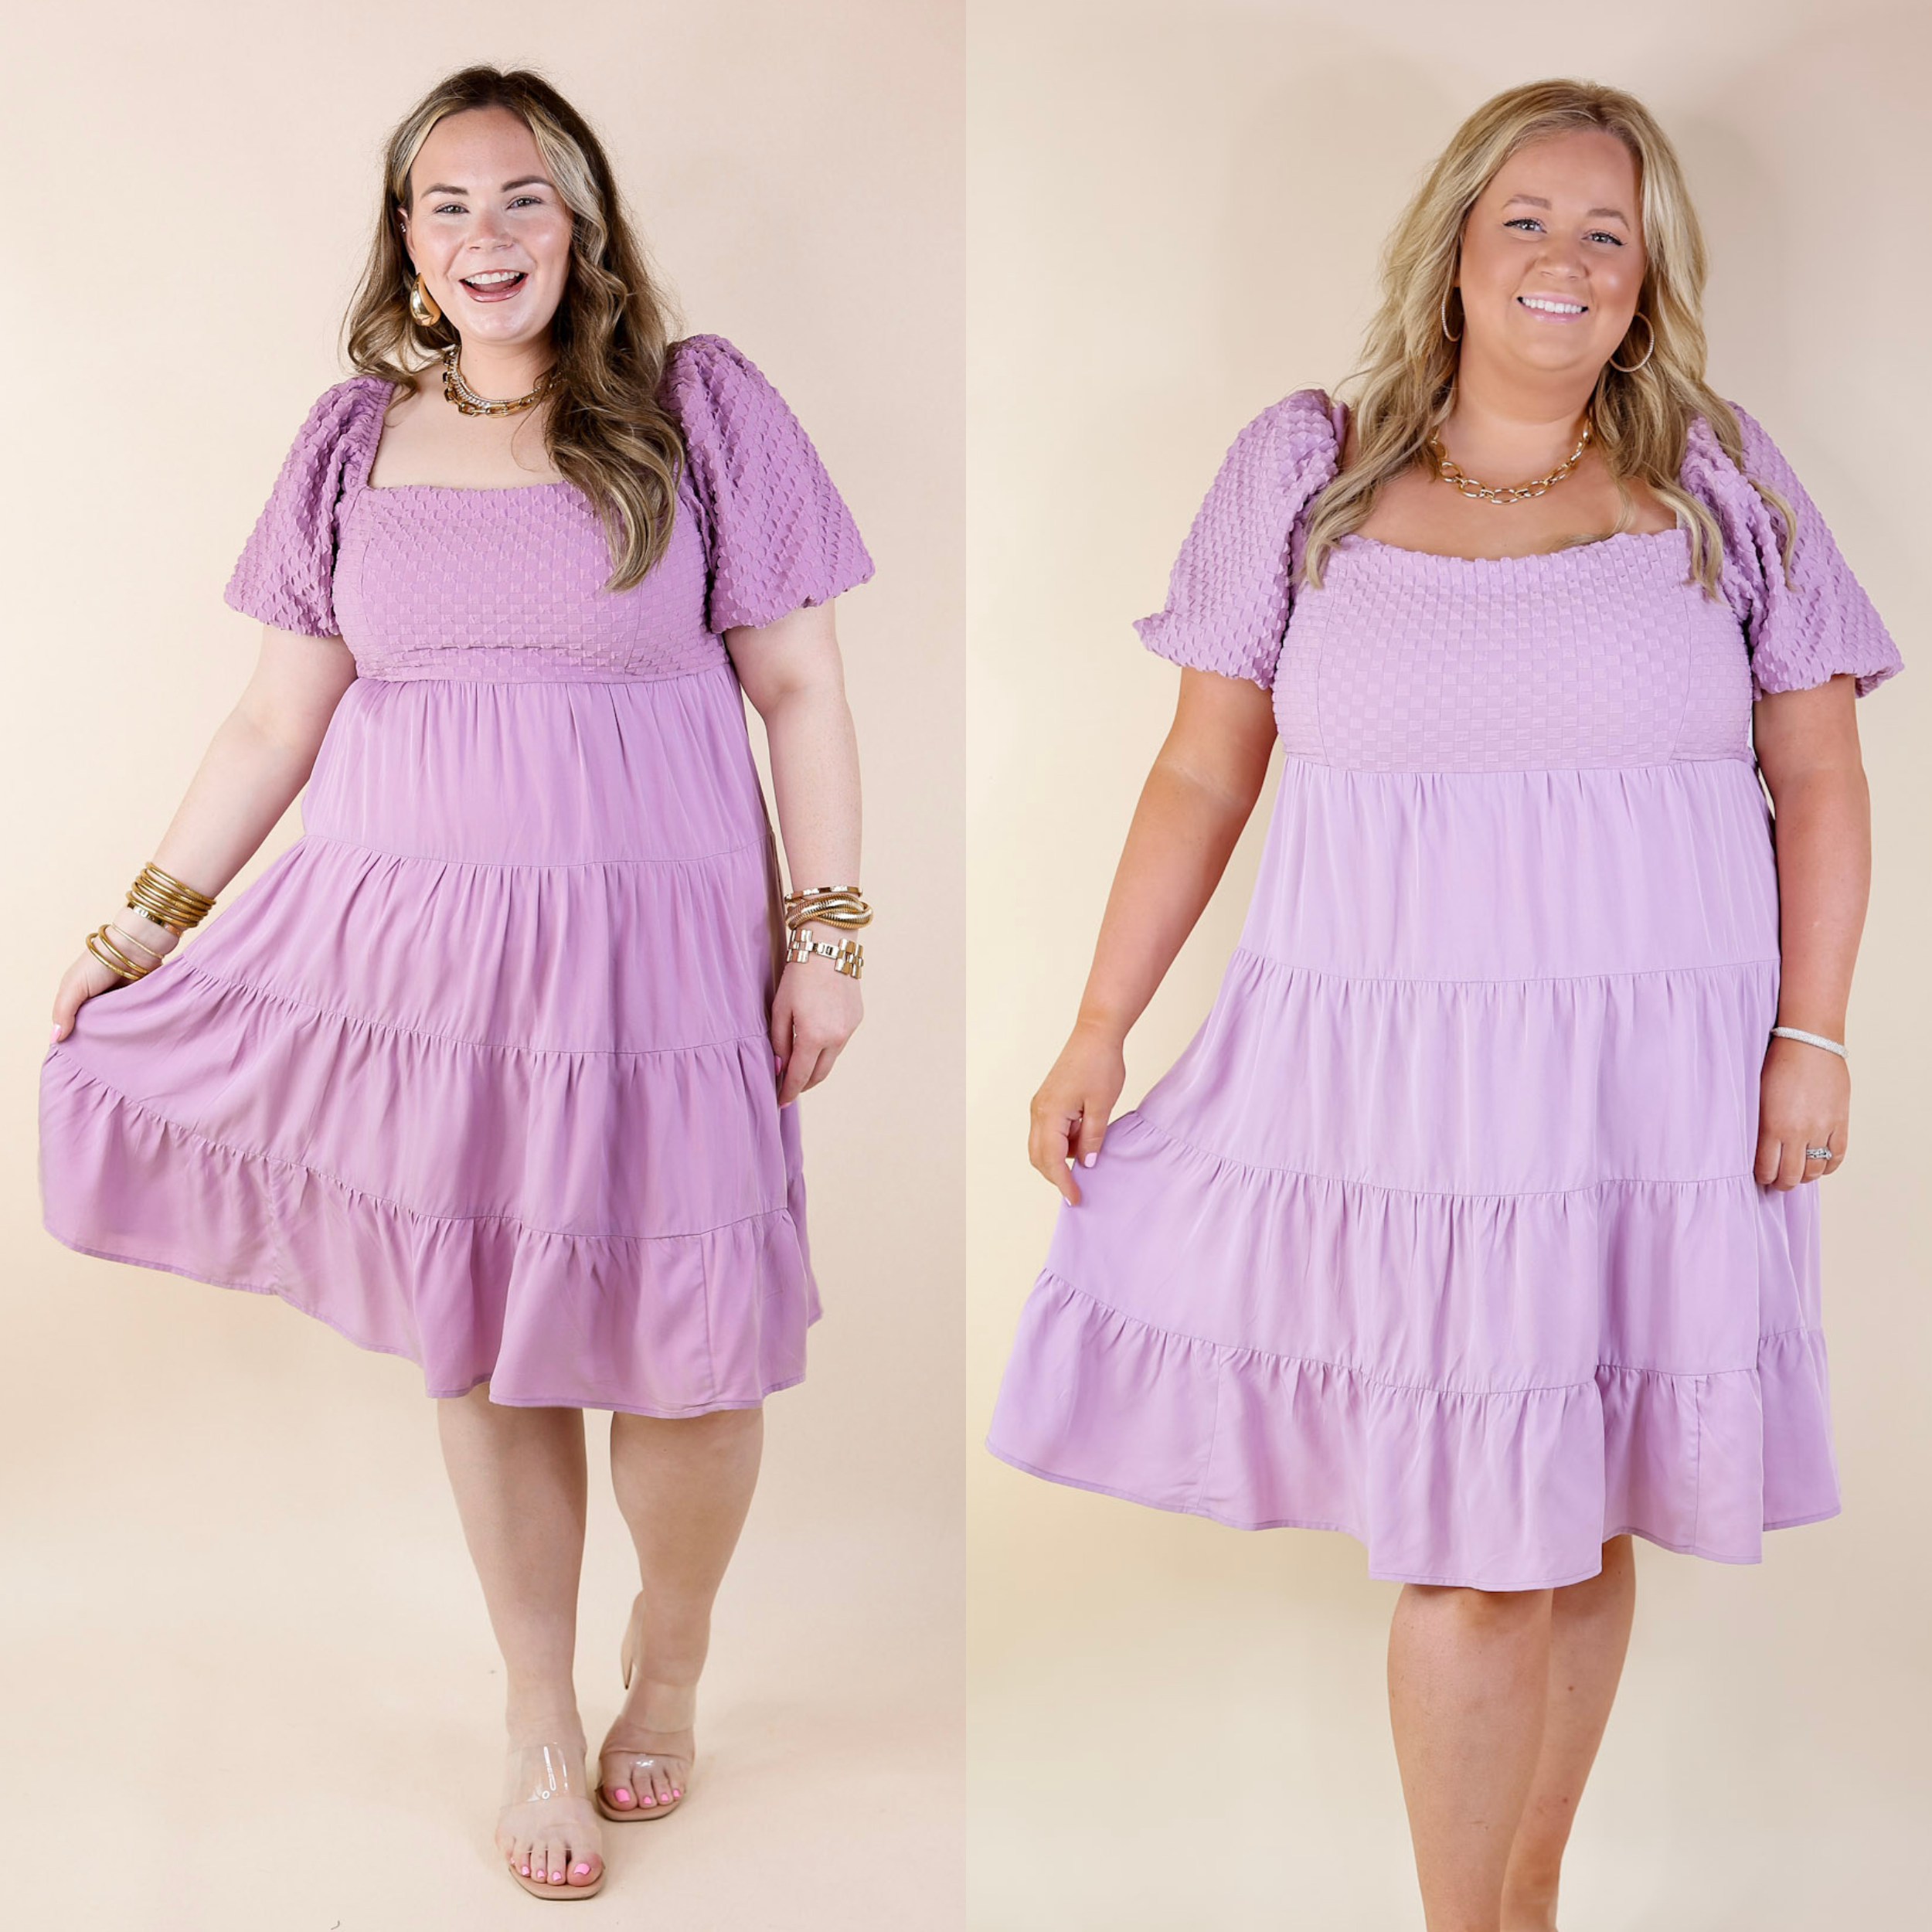 Coastal Cruising Babydoll Dress with Short Balloon Sleeves in Lavender Purple - Giddy Up Glamour Boutique